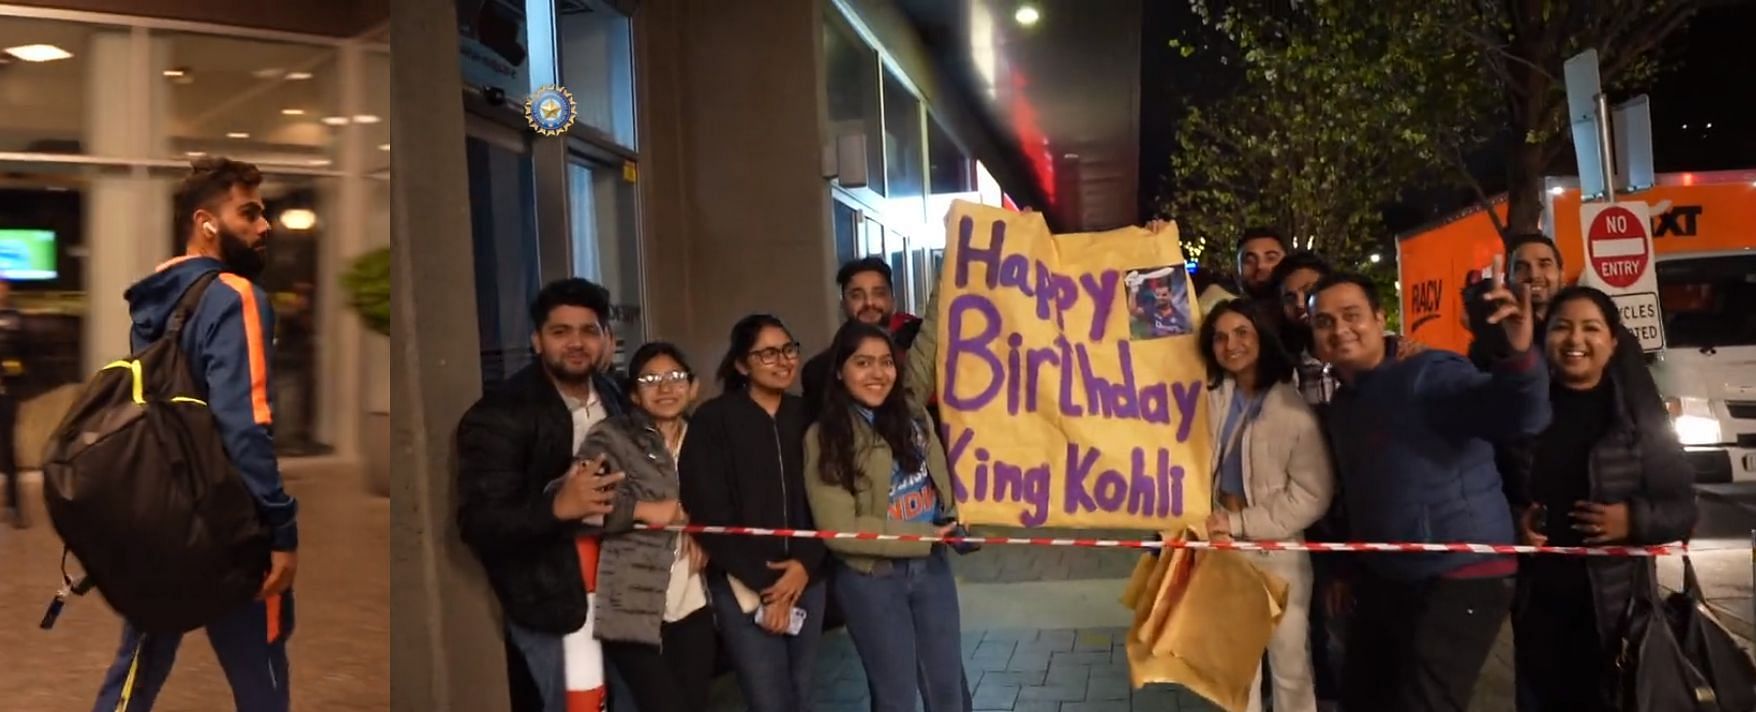 T20 World Cup 2022: [WATCH] Fans in Adelaide wish Virat Kohli happy birthday  in advance as Team India head to Melbourne for last Super 12 match